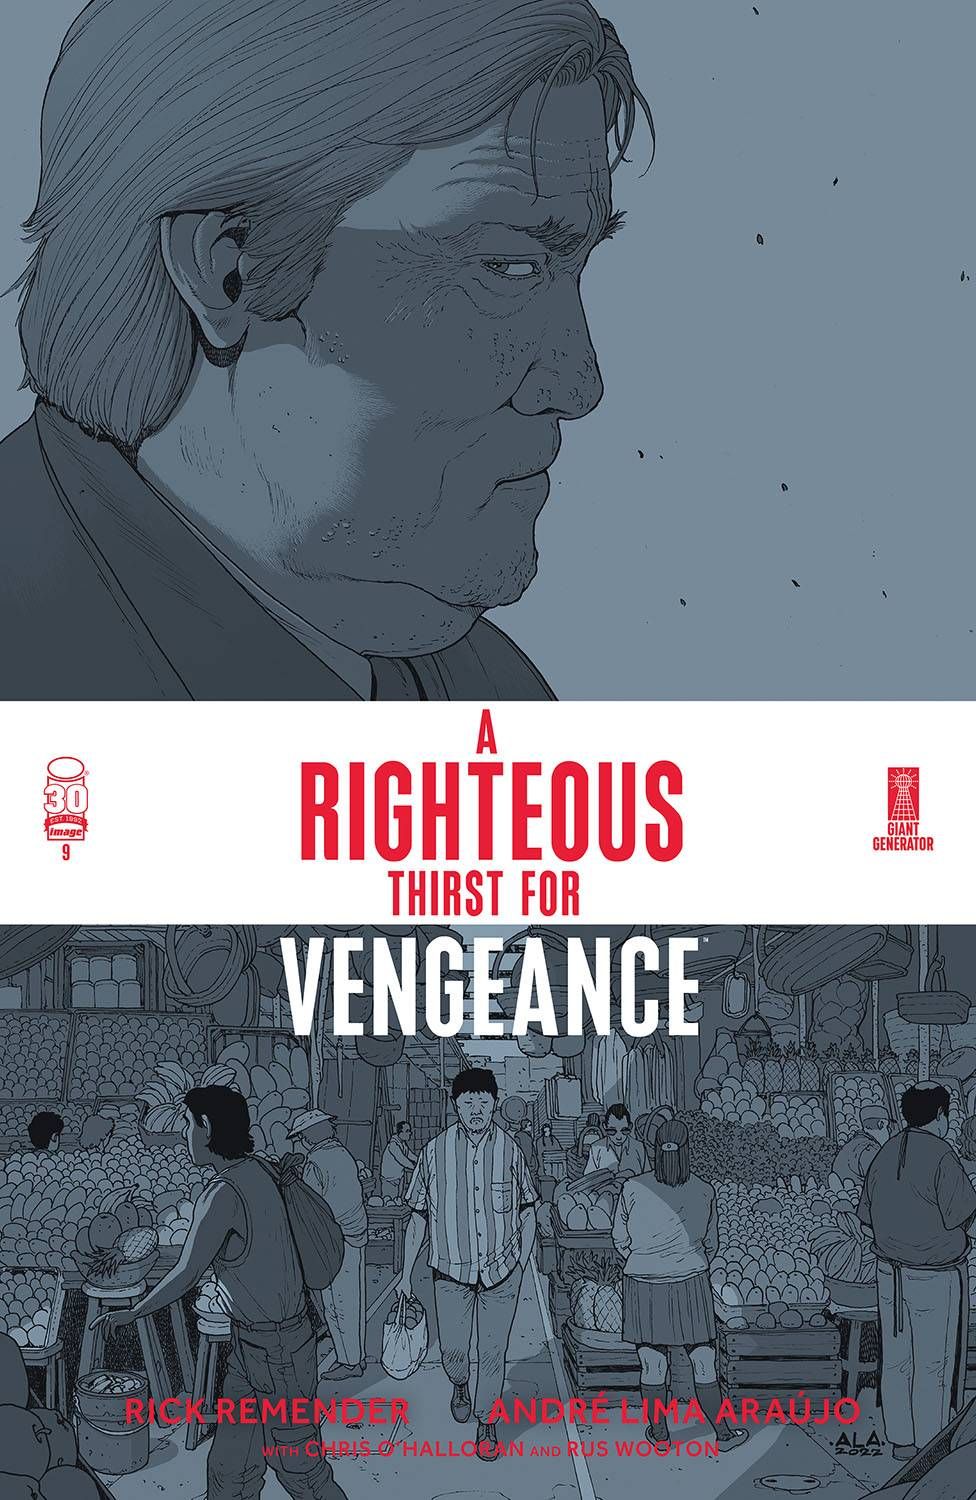 A Righteous Thirst for Vengeance #9 Comic